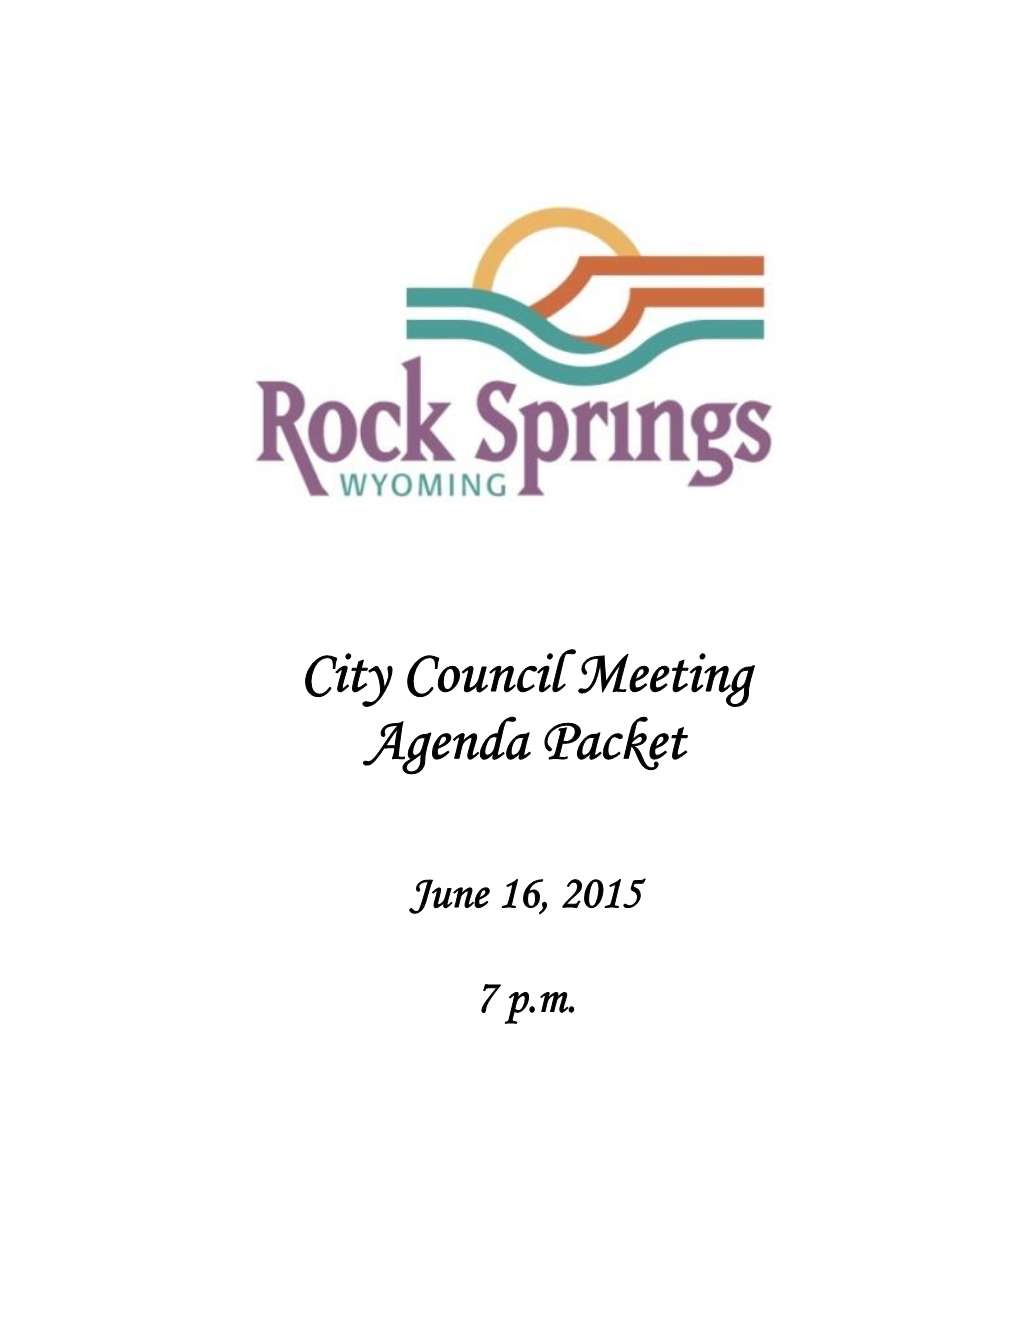 City Council Meeting Agenda Packet